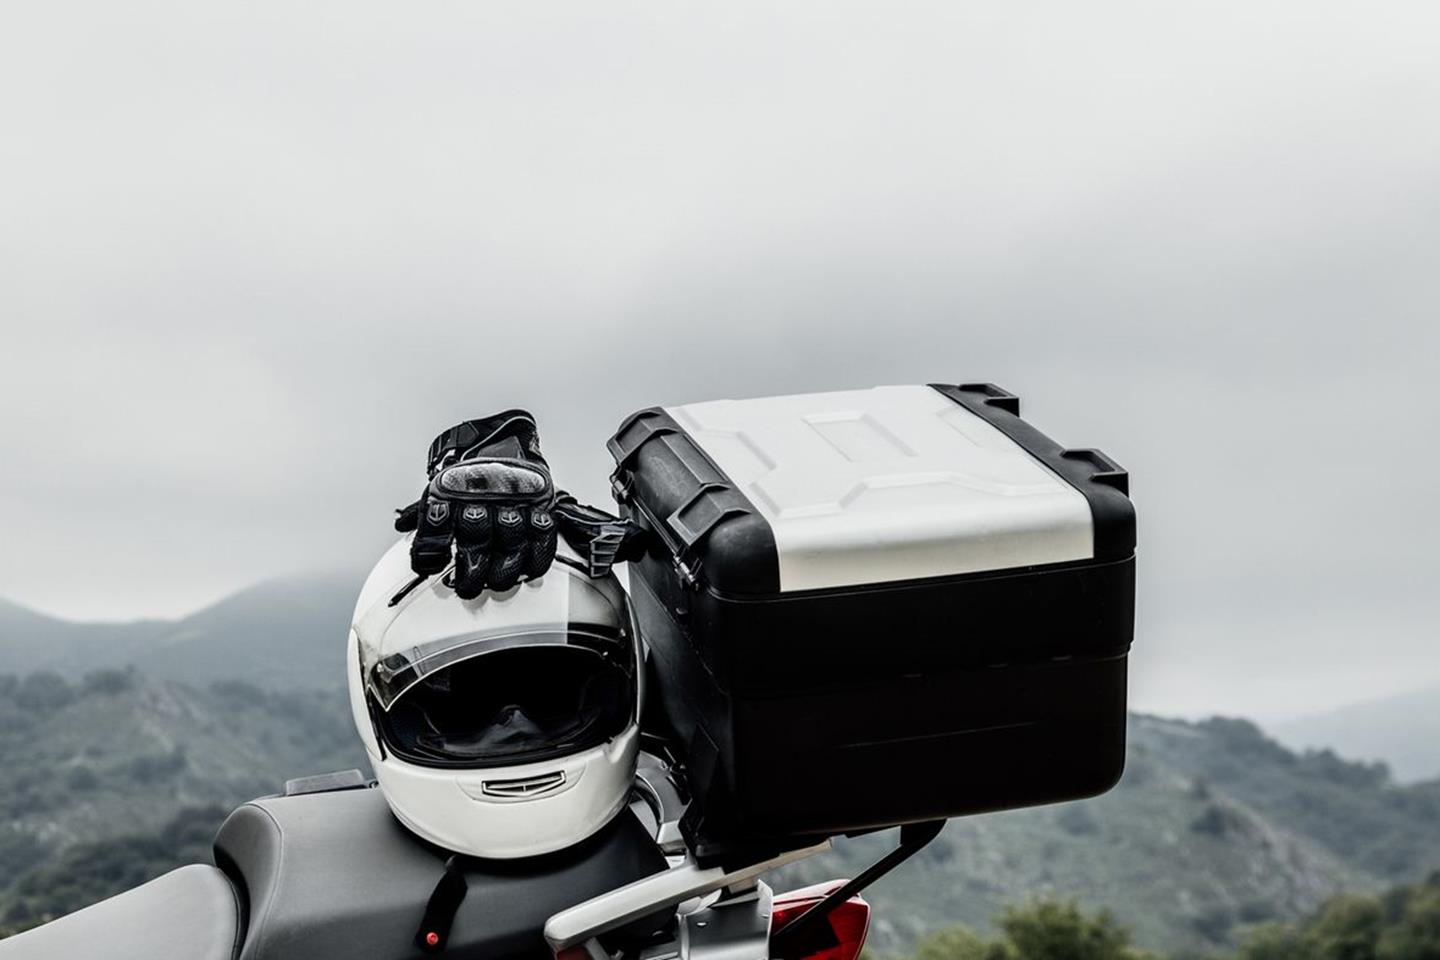 Moped Motorbike Rear Luggage Black Top Case Helmet Top Box Storage Scooter universal for Motorcycle 27L 